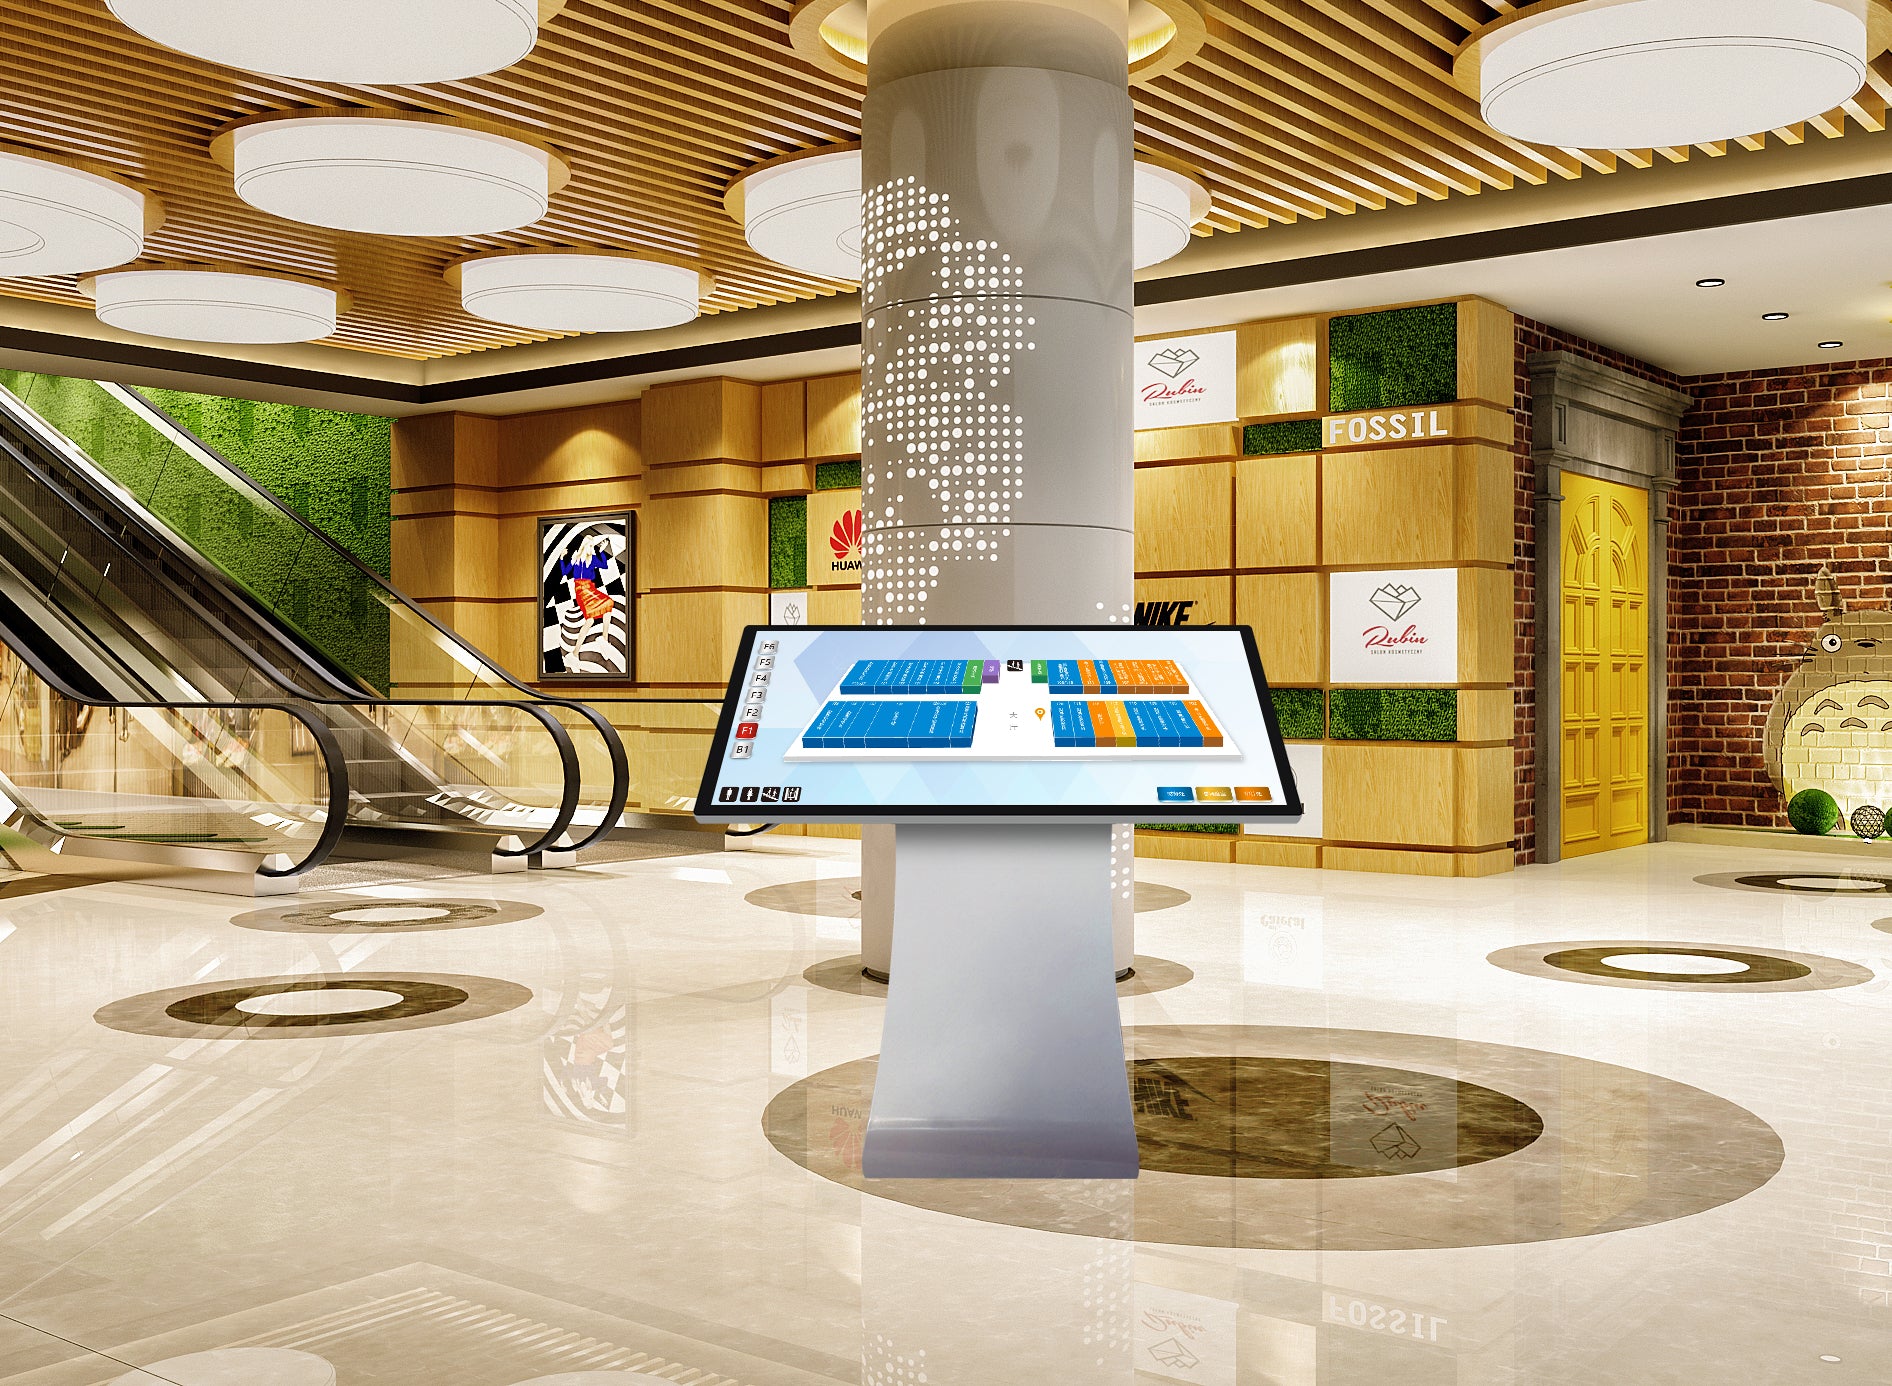 The application of touch query machines as an intelligent navigation system in a large shopping mall